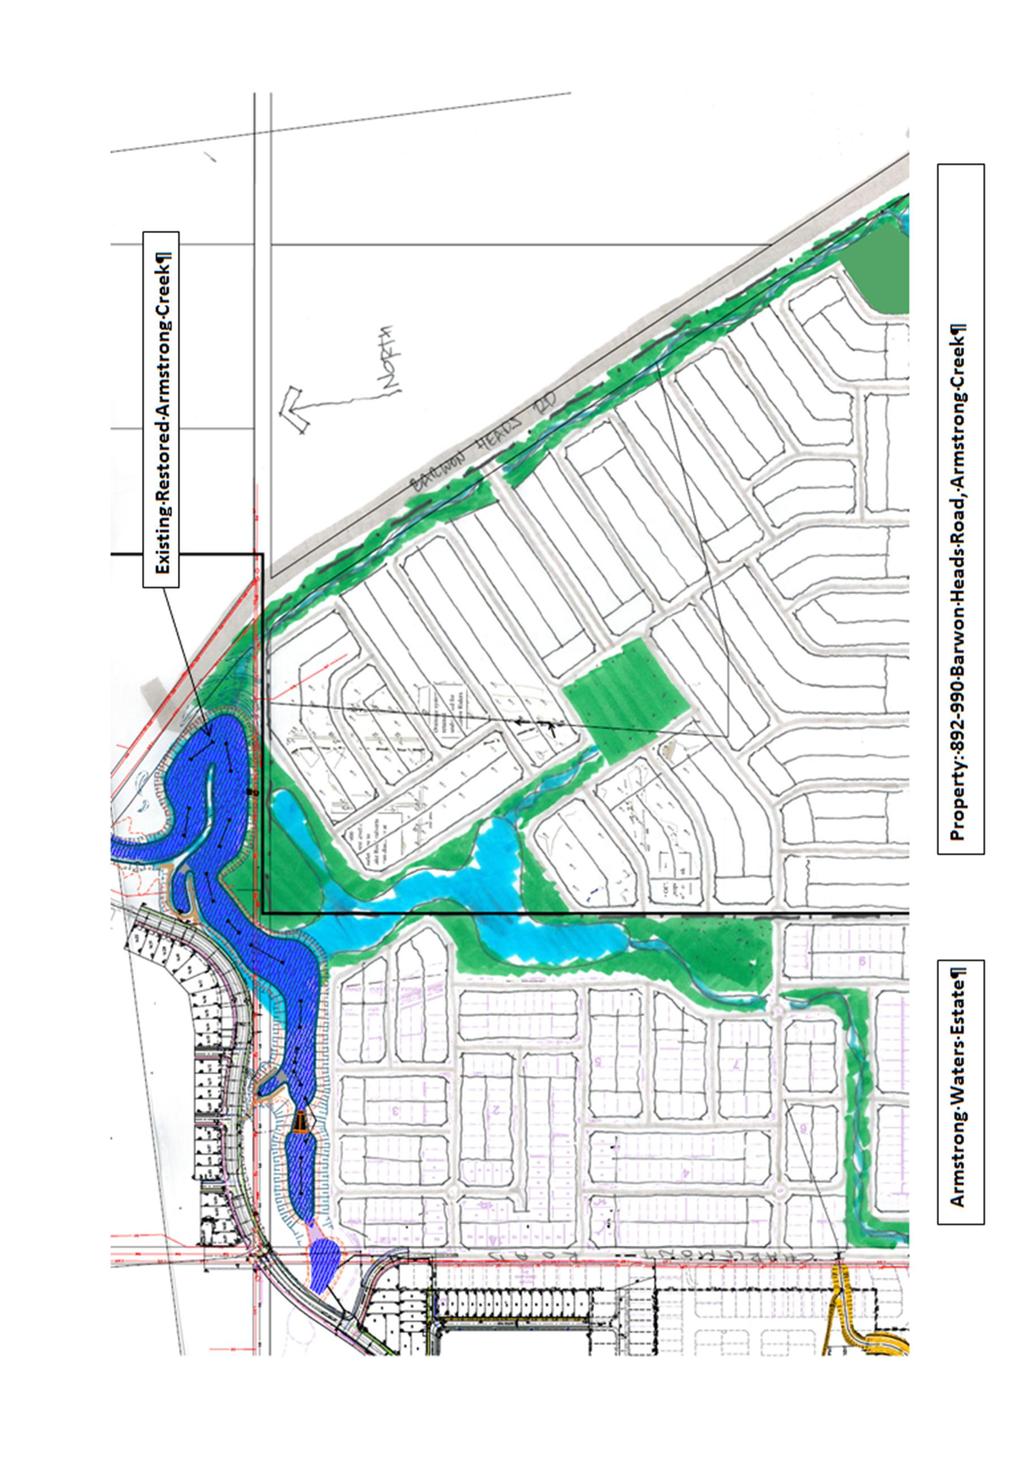 Figure 3: Proposed Site Drainage including Armstrong Waters Concept and Proposed Drainage Features